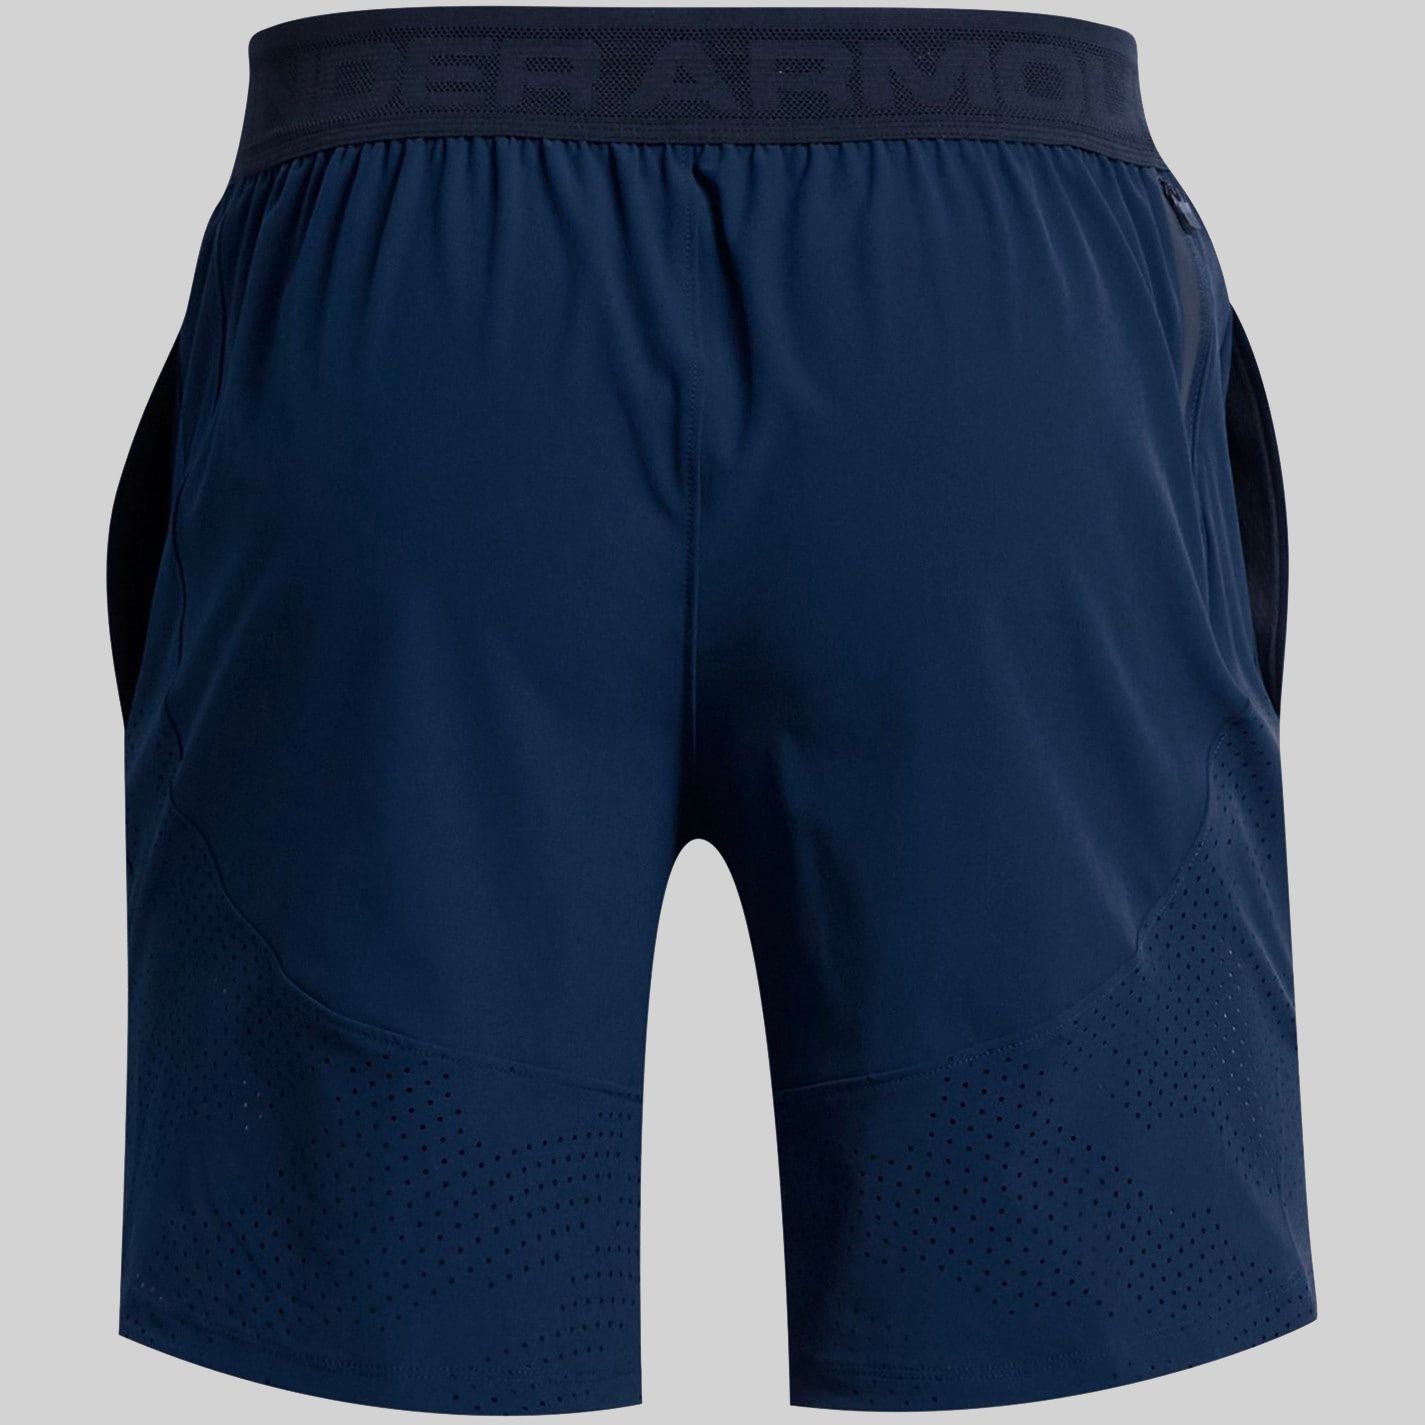 Under Armour Stretch Woven Shorts